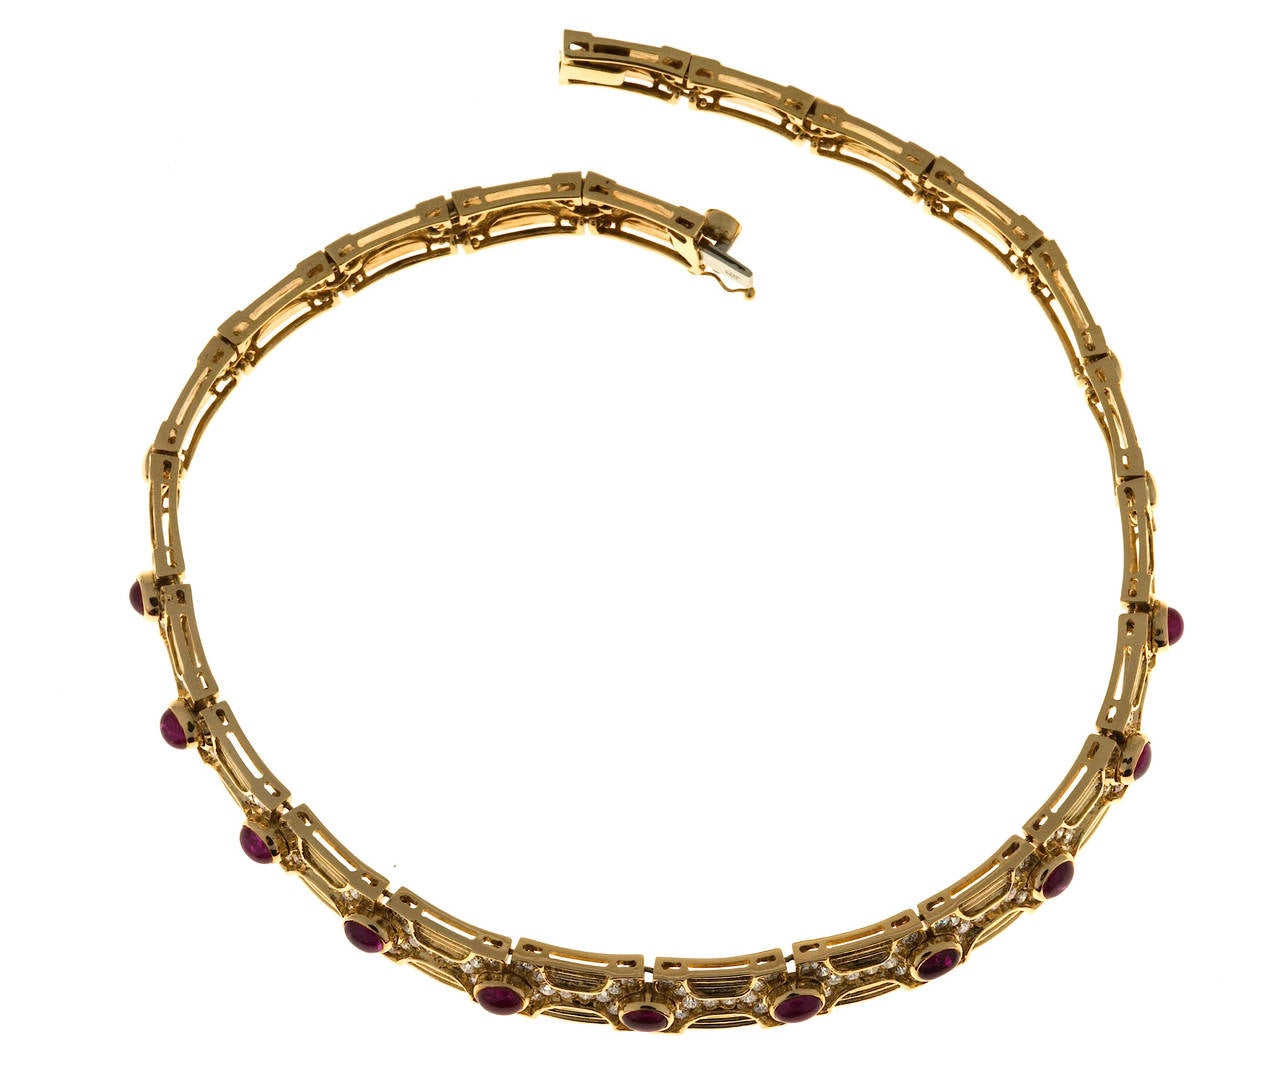 Extra fine high quality hinged link solid 18k yellow gold necklace. Made for a small neck, looks absolutely beautiful on. Bright translucent red rubies, each and every one good enough to be in a ring and Ideal cut colorless (F) VVS to VS diamonds.